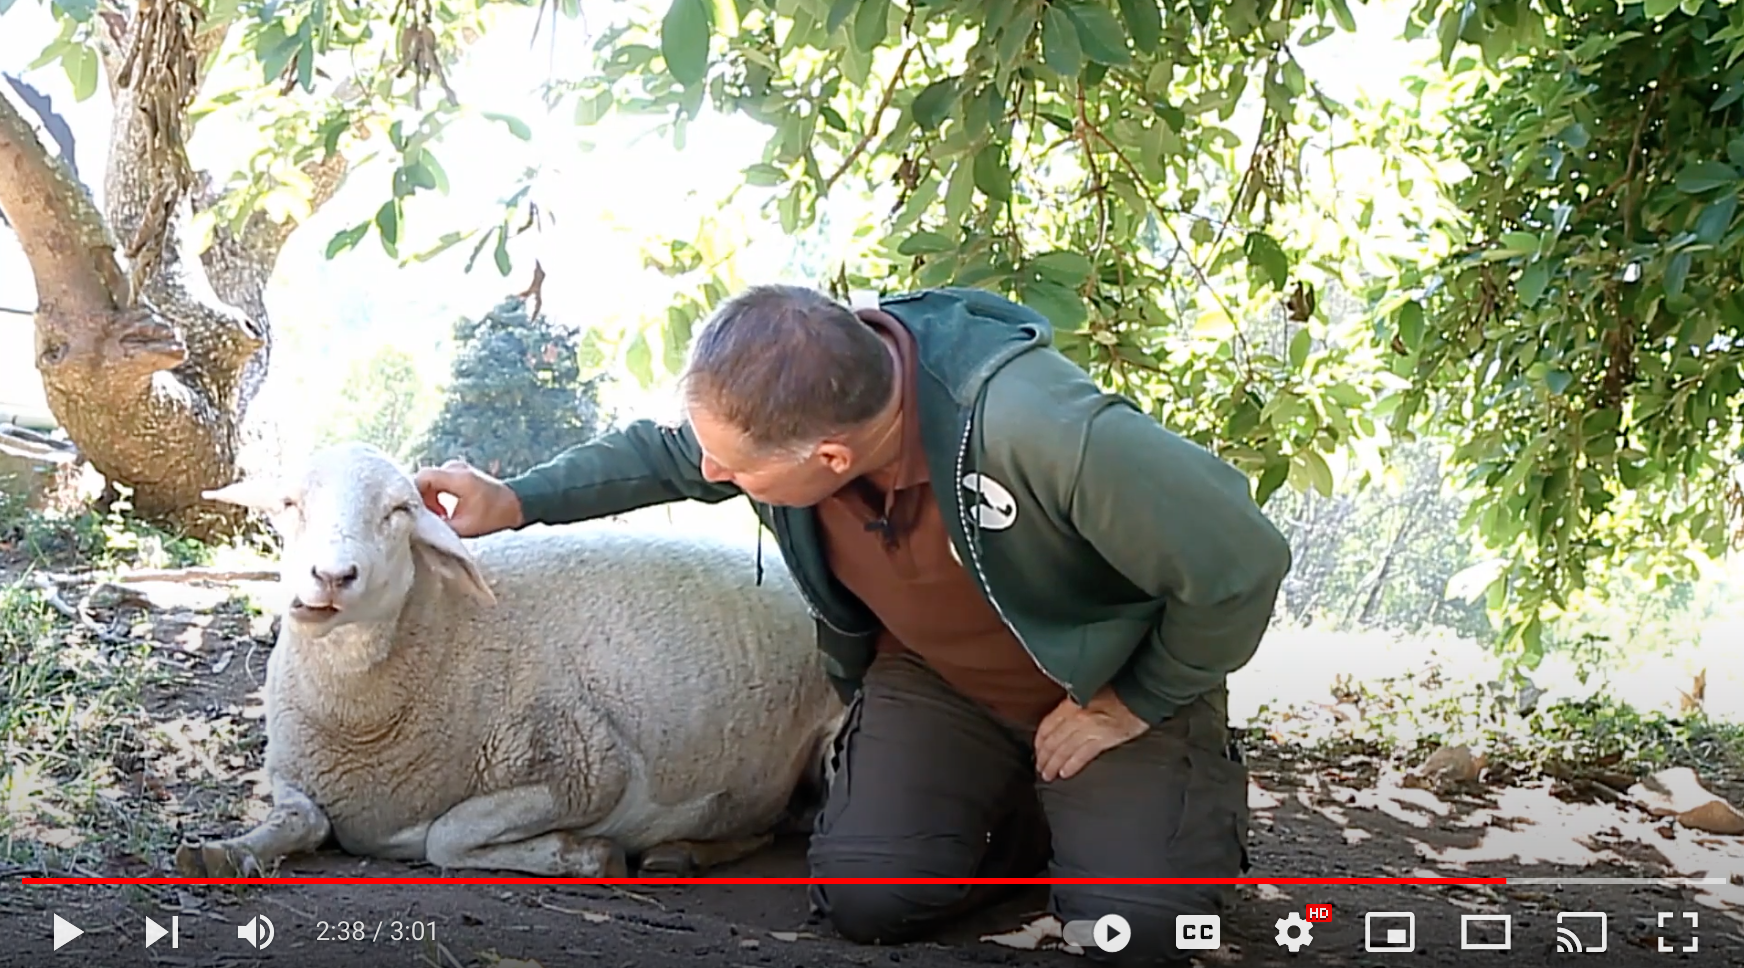 Isabella 's story on video and the fate of most lambs in Australia